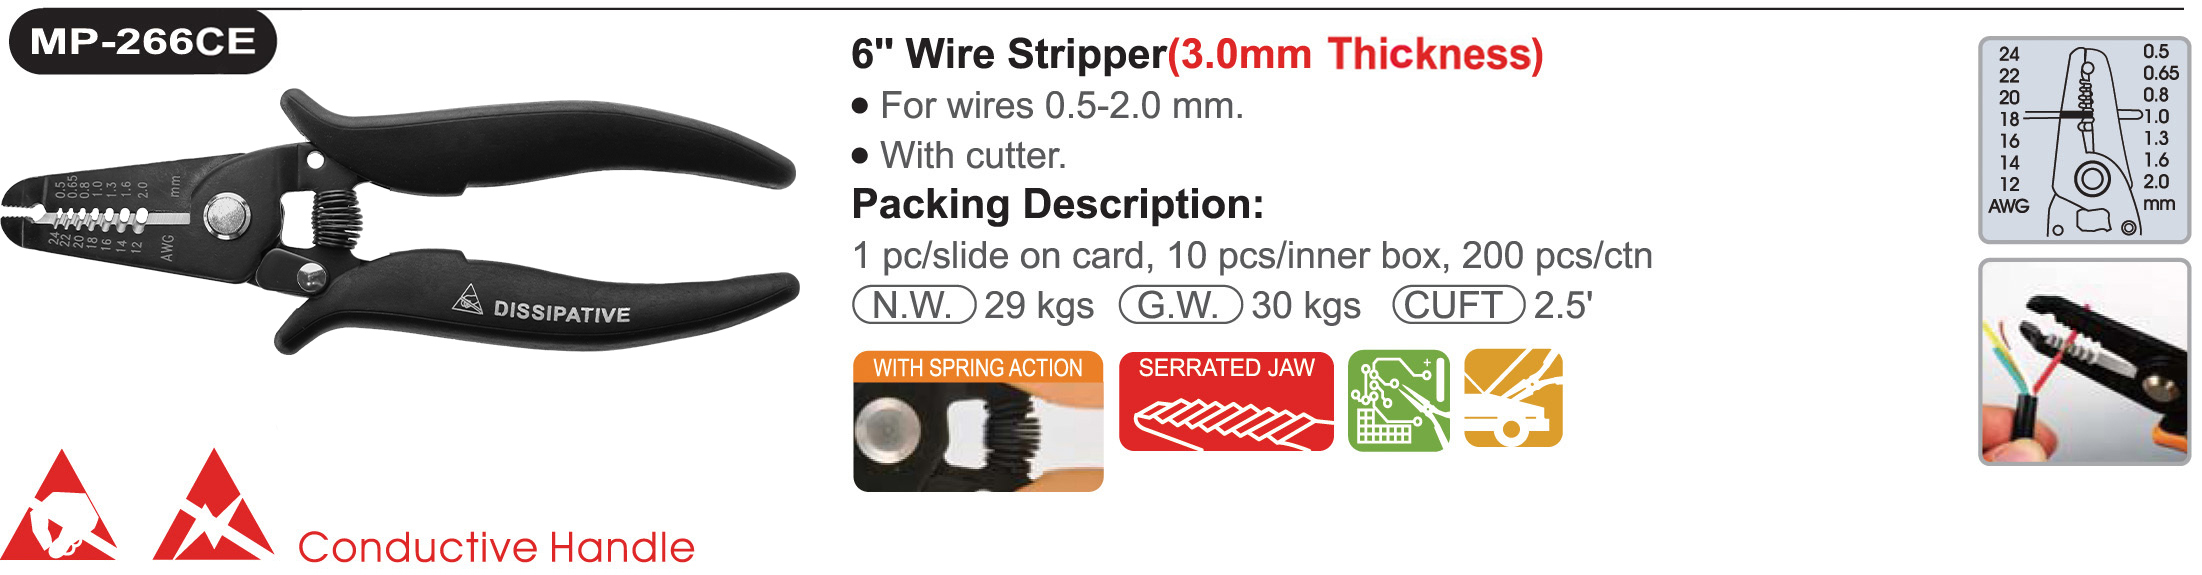 proimages/product/pliers/wire_strippers/ELECTRONICS_WIRE_STRIPPER_ESD/MP-266CE/MP-266CE.jpg